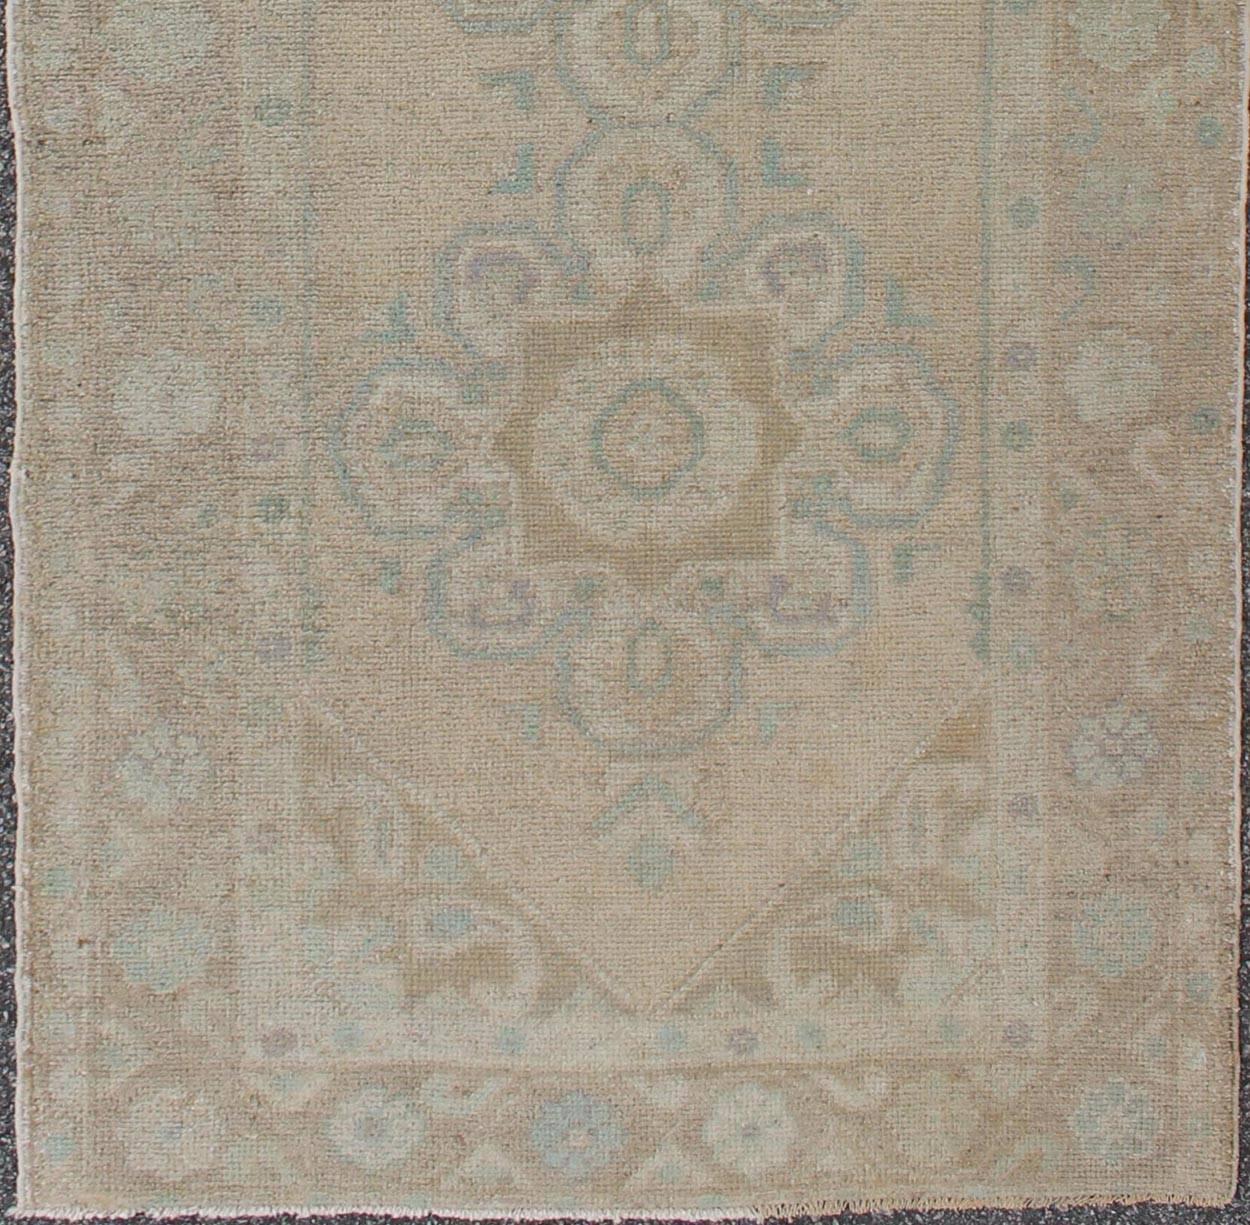 This vintage Turkish Oushak gallery rug (1930) features a unique blend of colors and an intricately beautiful design. The central medallions consist of a vertical line of floral elements, surrounded by a complementary pattern in the border. The